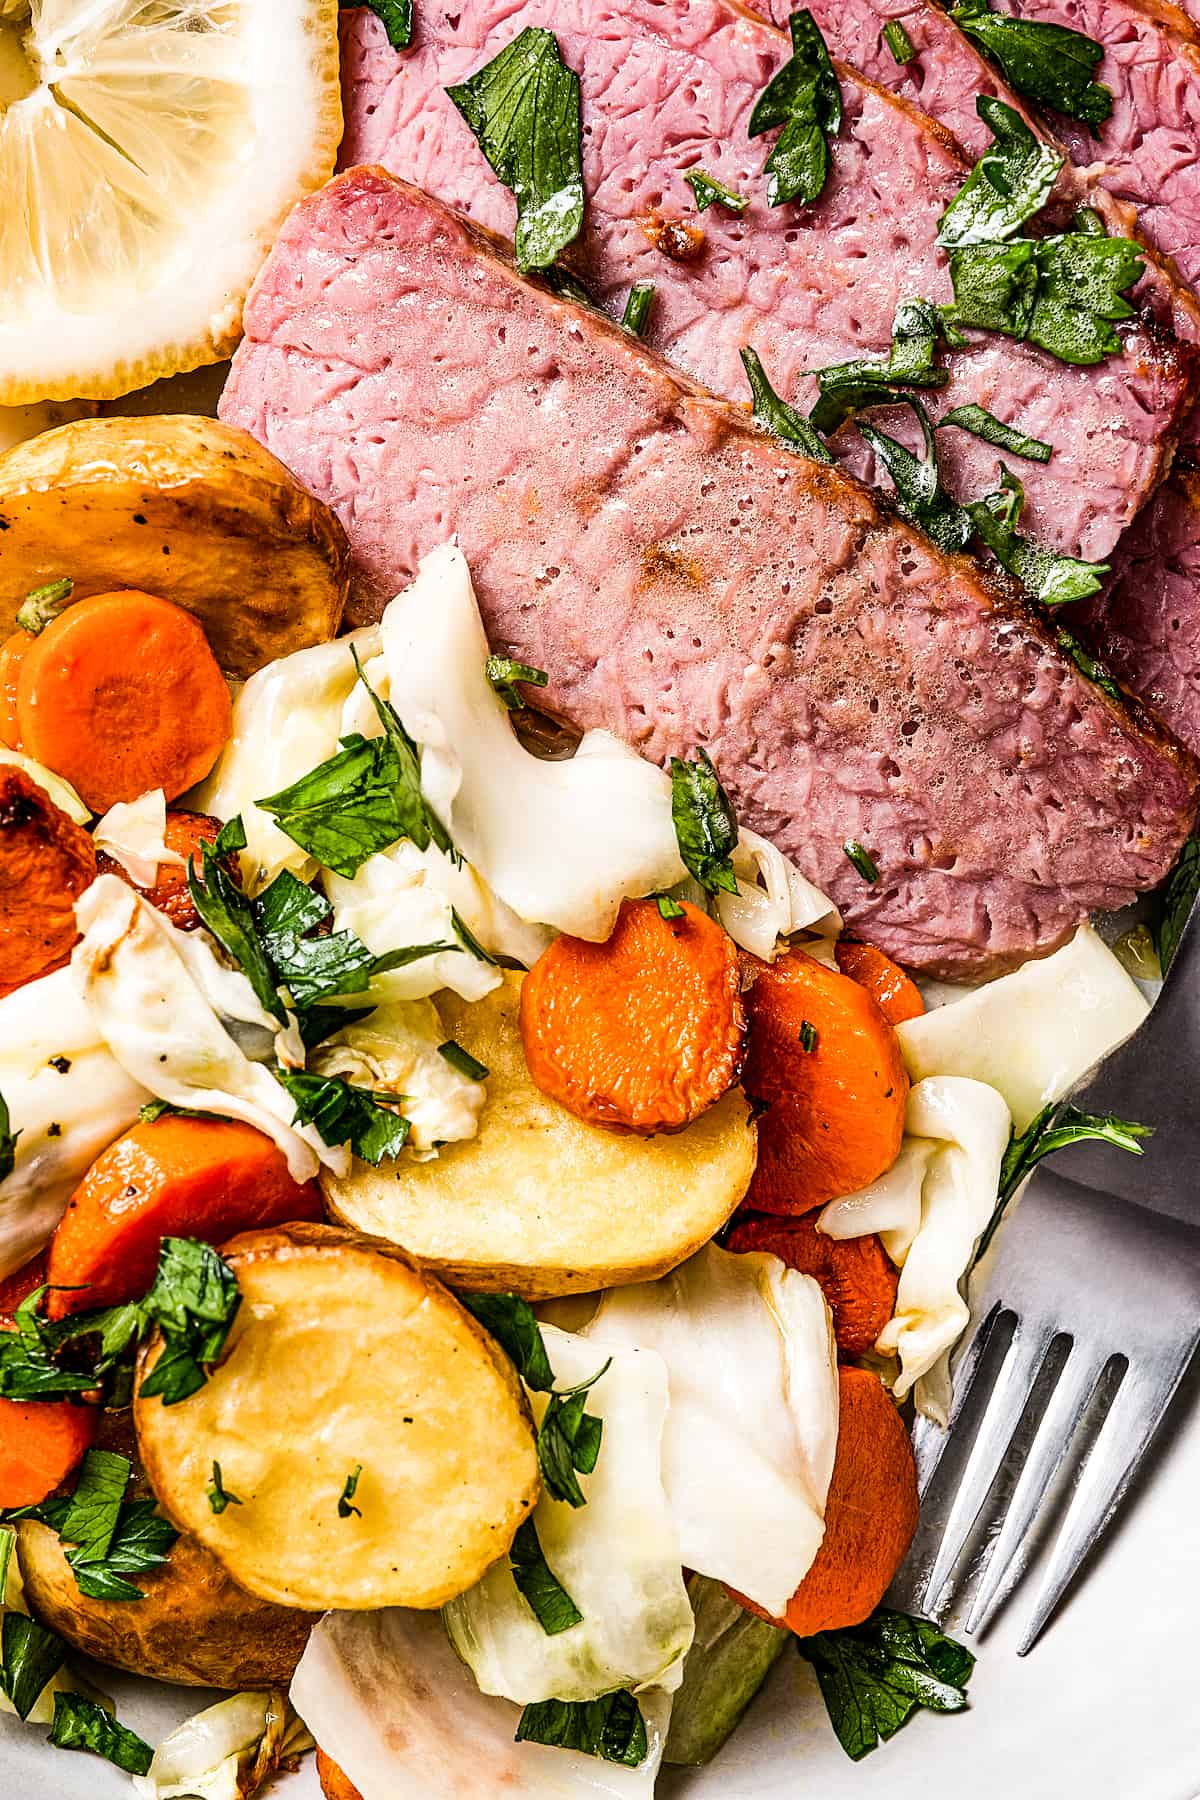 Corned beef slices next to a medley of vegetables.